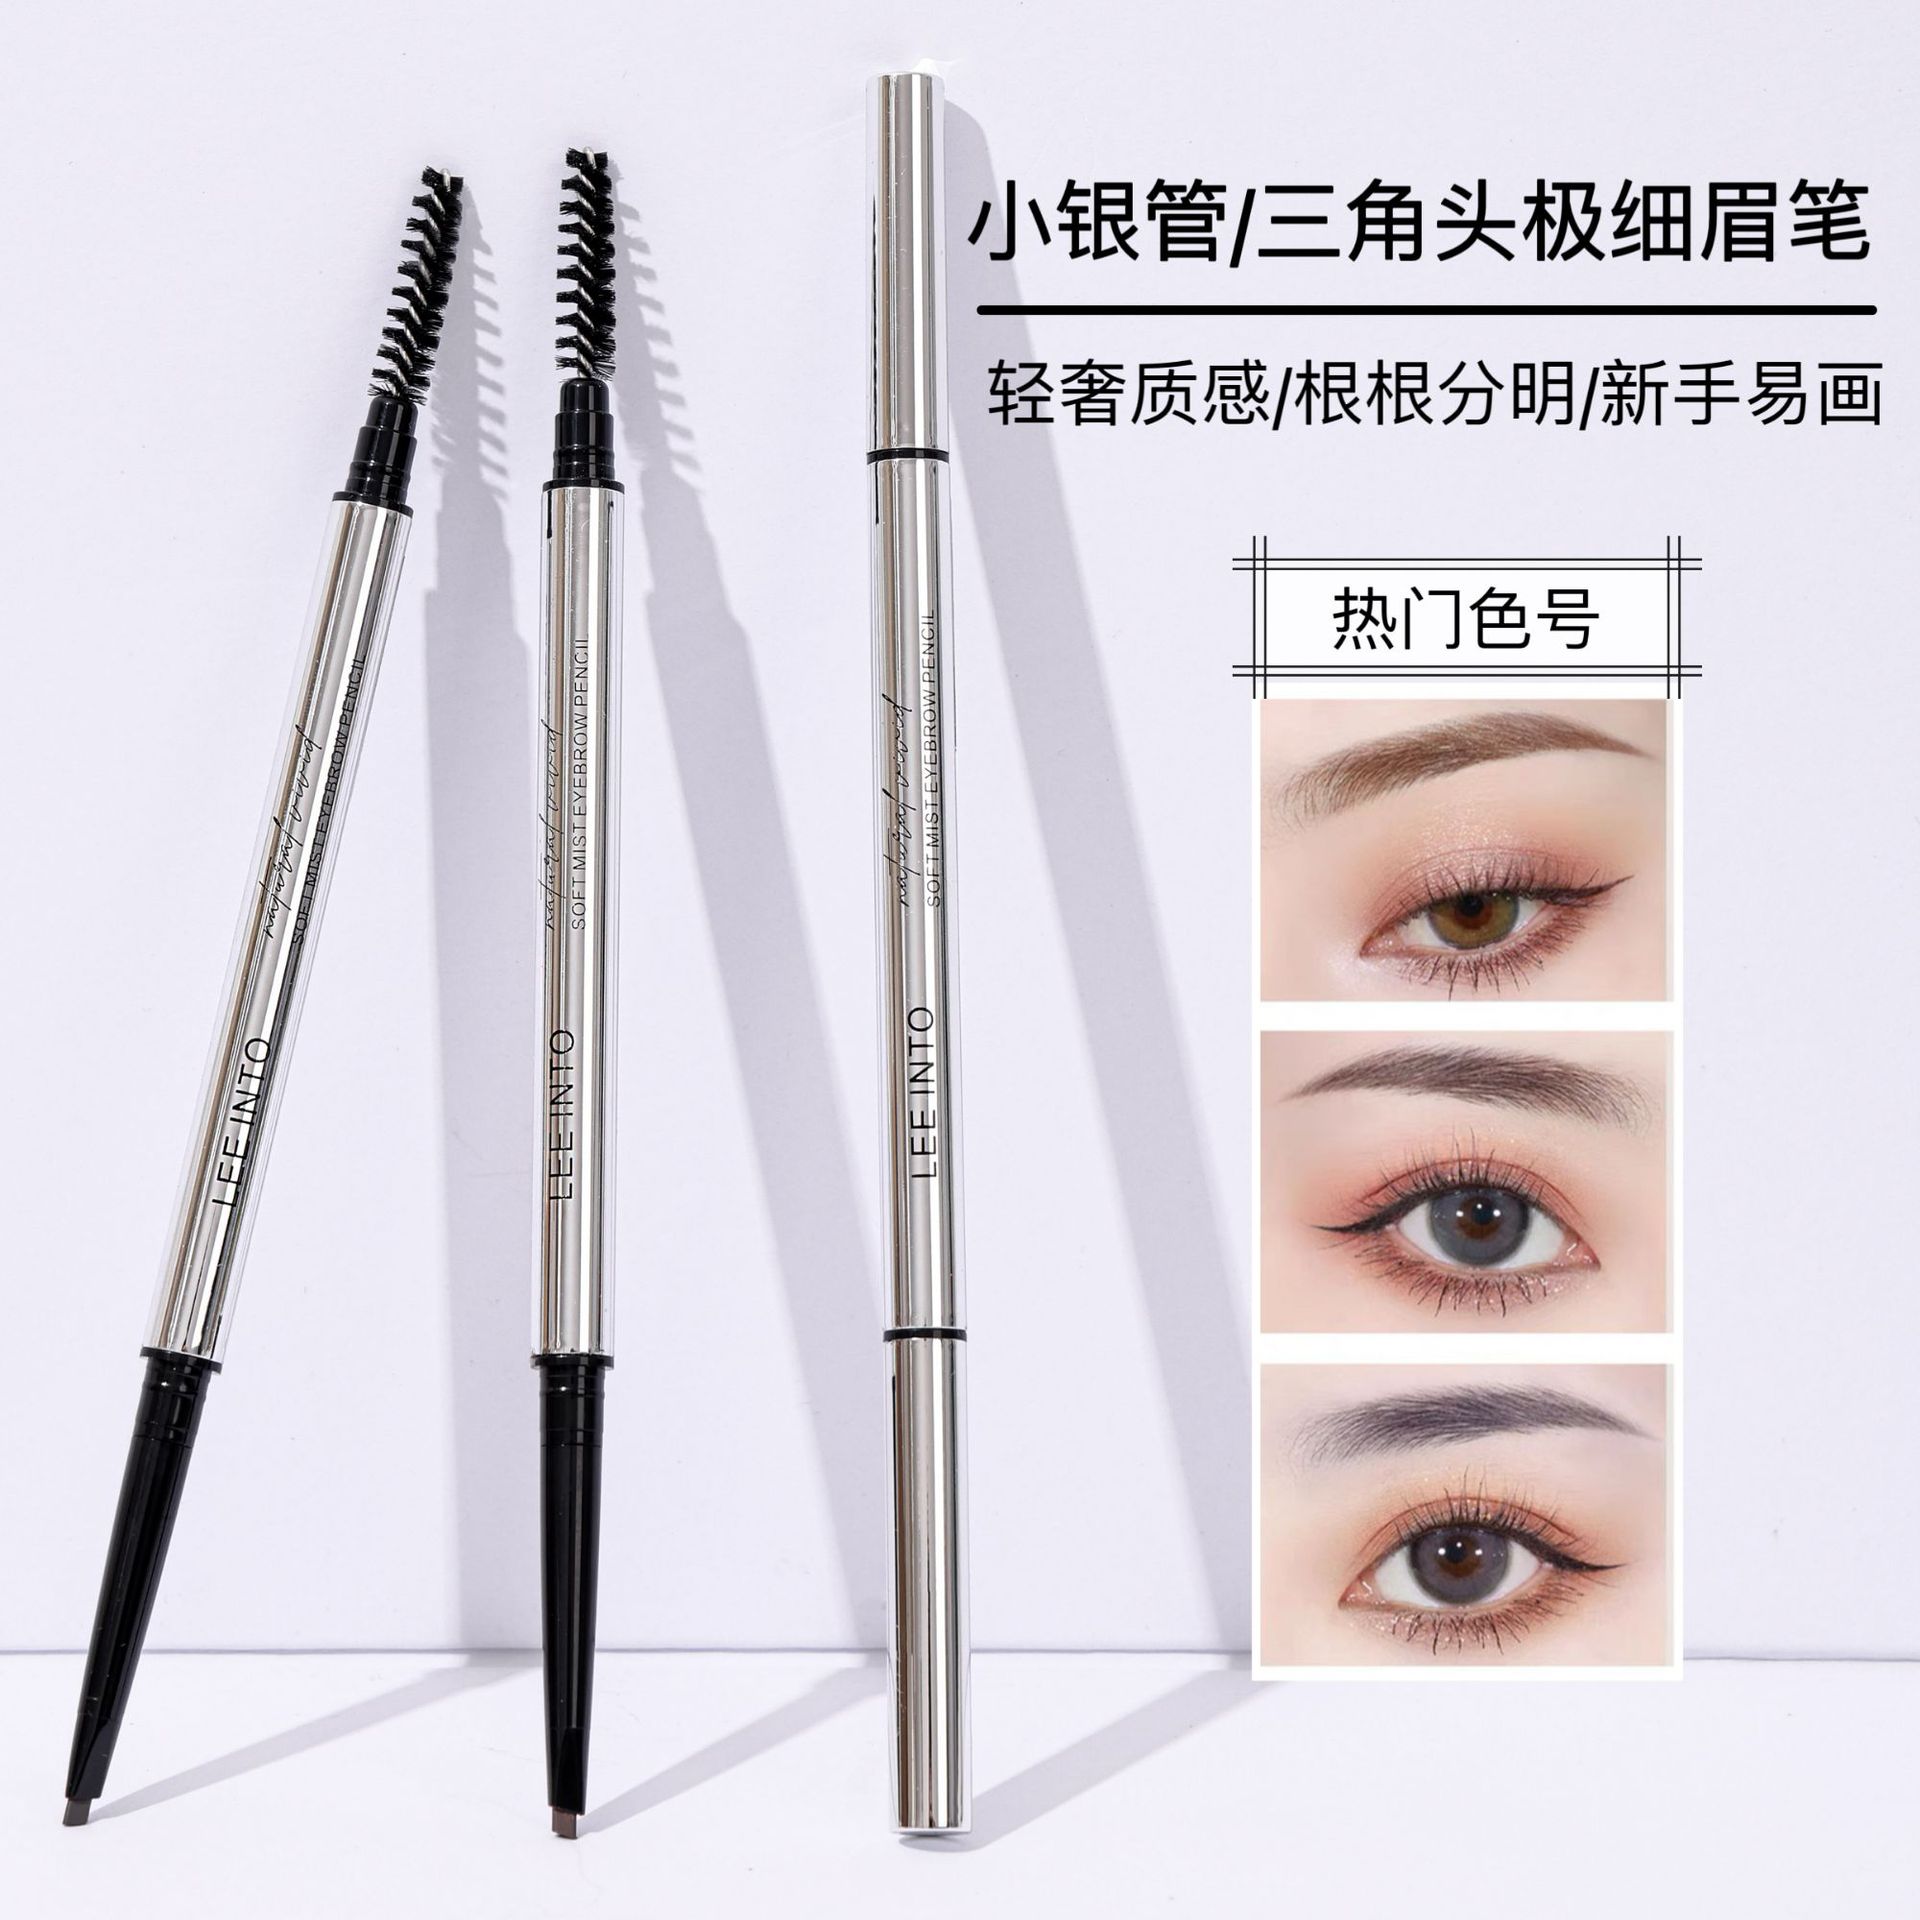 Lee into Natural Soft Mist Eyebrow Pencil Wild Eyebrow Double Head Extremely Thin Cosmetics Wholesale Waterproof Not Smudge Authentic